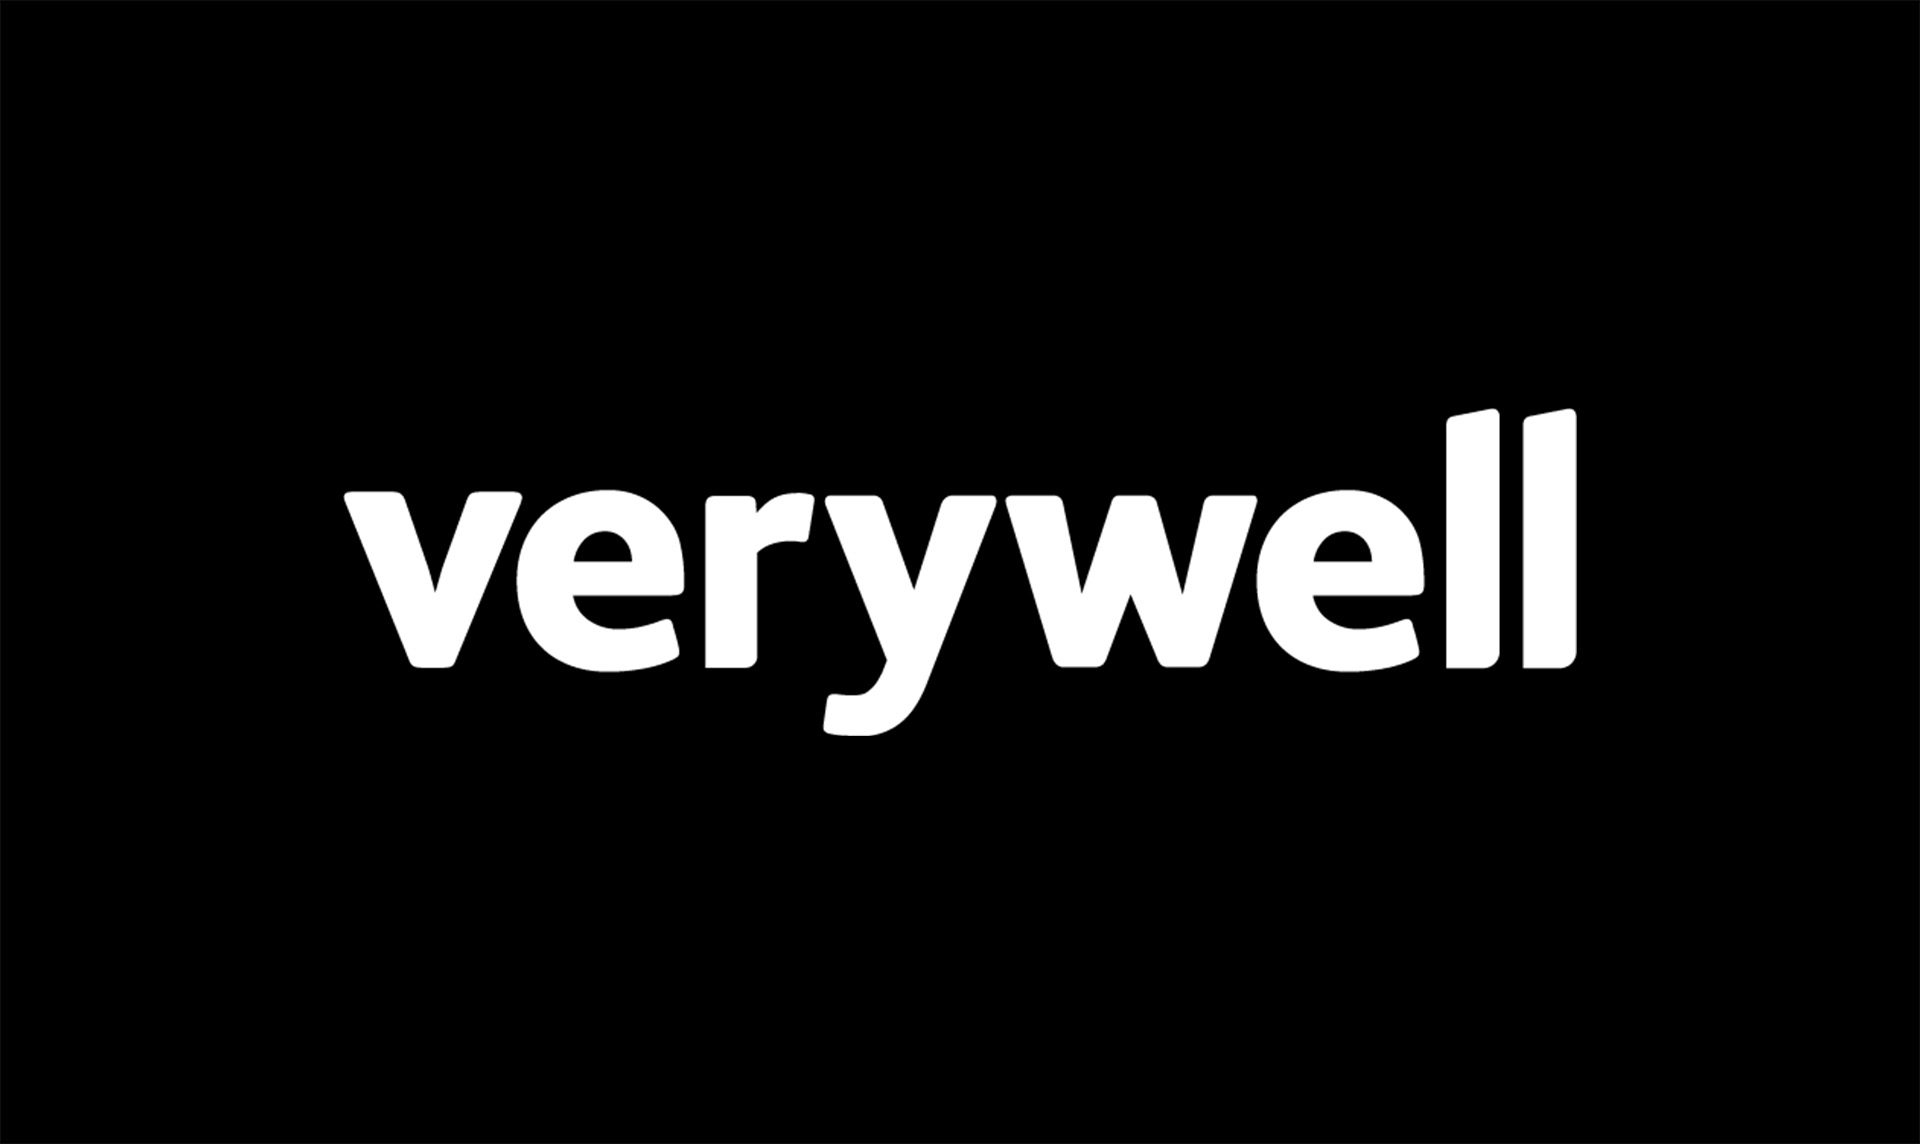 White text spelling "verywell" centered on a black background.